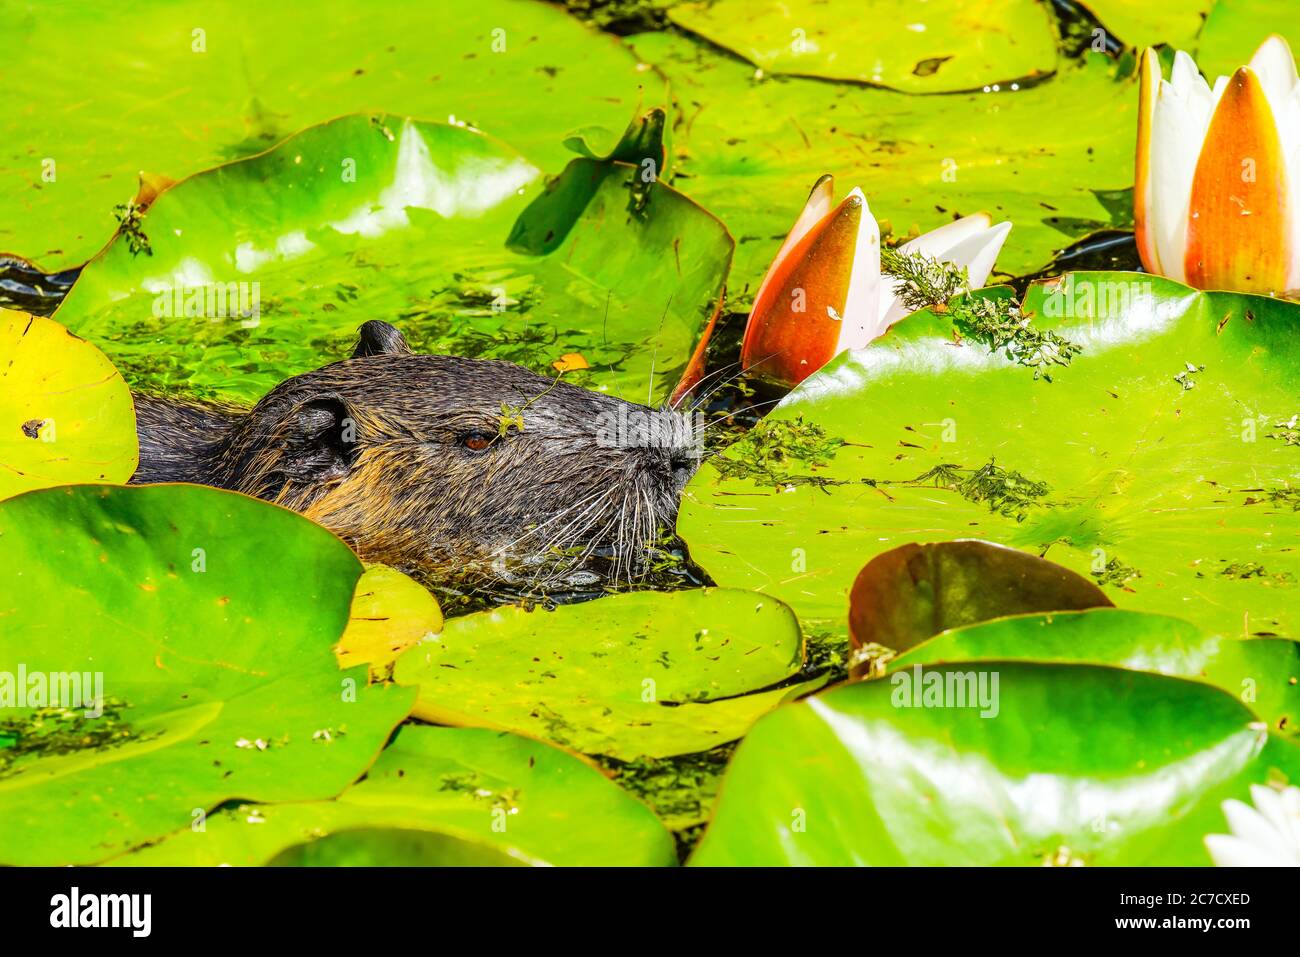 Adult coypu in the pond. Coypu is a large, herbivorous, semiaquatic rodent. Member of the family Myocastoridae included within Echimyidae, the family Stock Photo